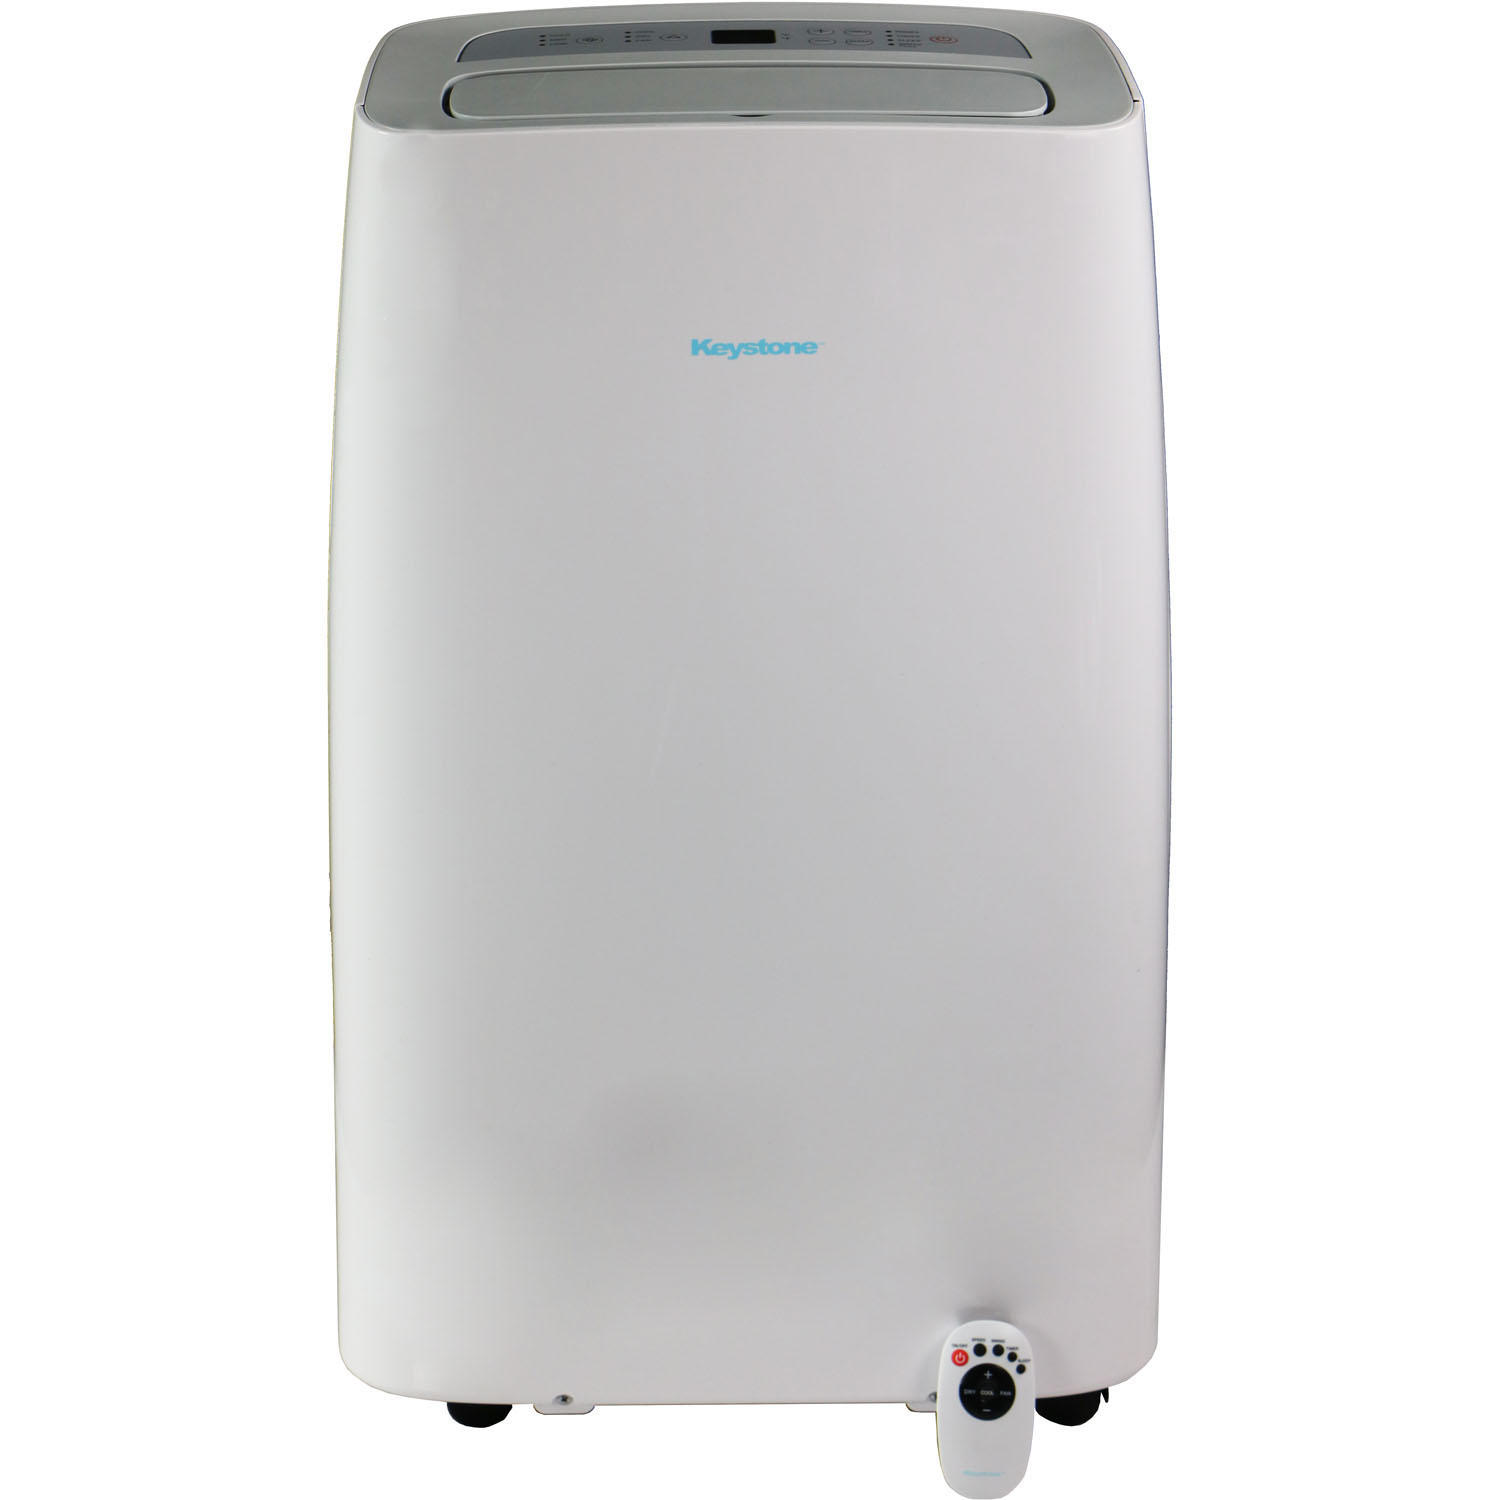 Keystone KSTAP14NA 115V Portable Air Conditioner with “Follow Me” Remote Control